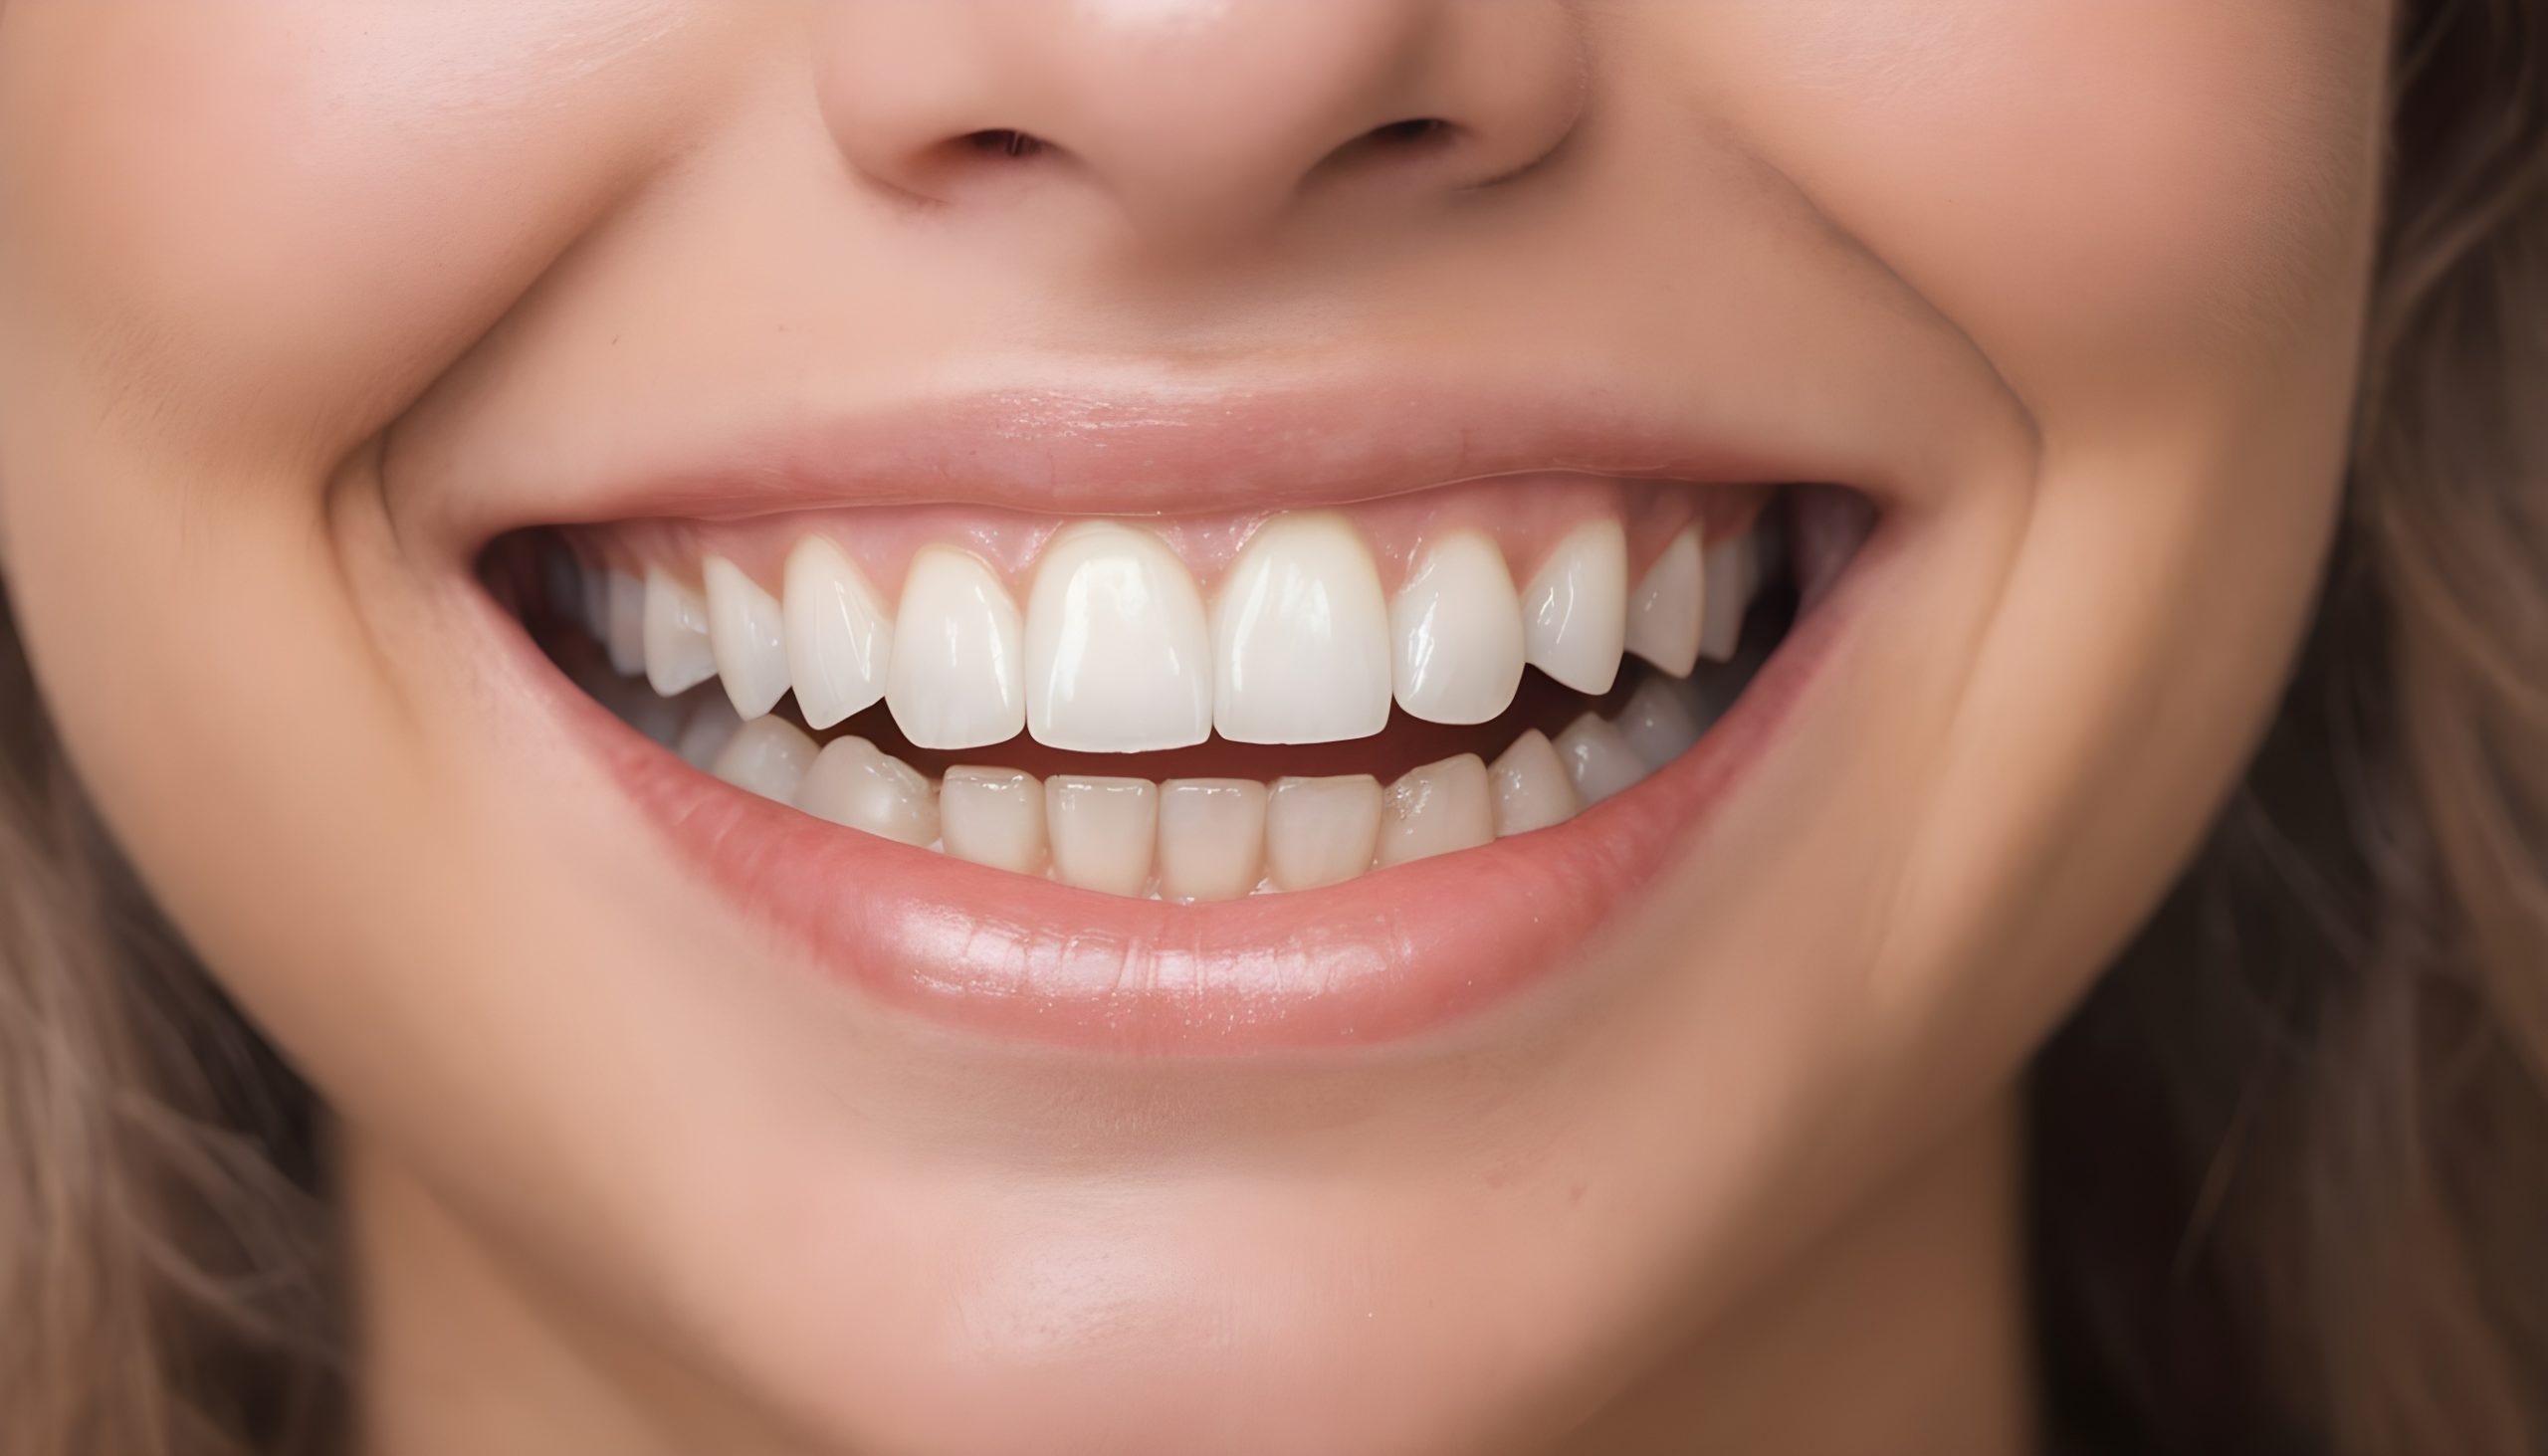 "Discover top-notch orthodontic services in Dallas for all ages. Get expert tips on choosing the right provider for your smile transformation."